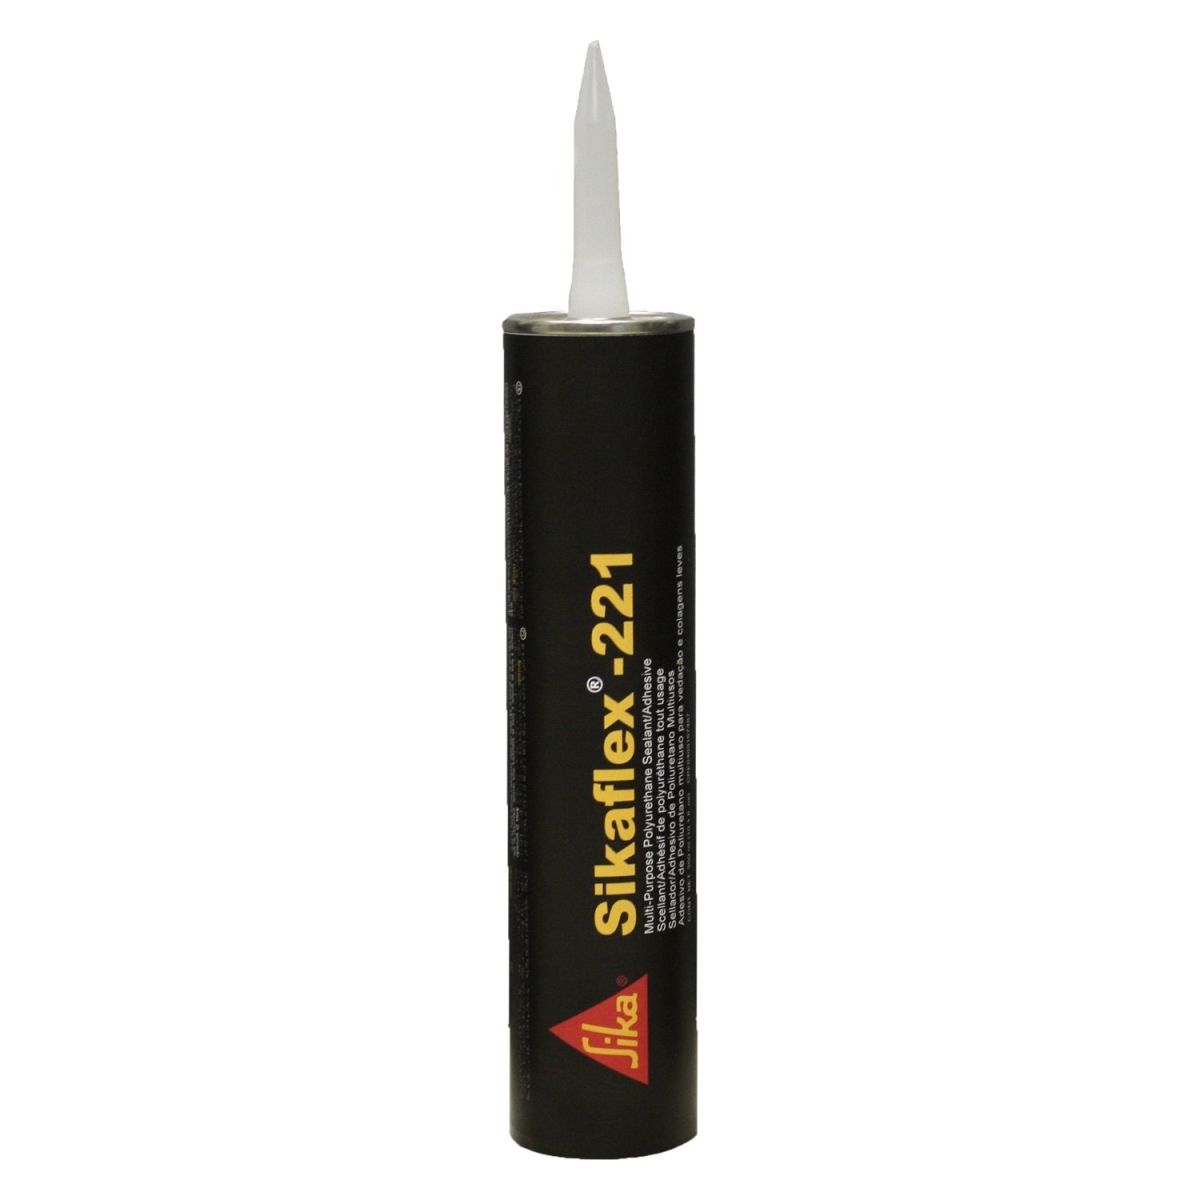 Picture of AP Products APP017-106449 300 ml Sikaflex 221 Non-Sag Colonial White Sealant Cartridge